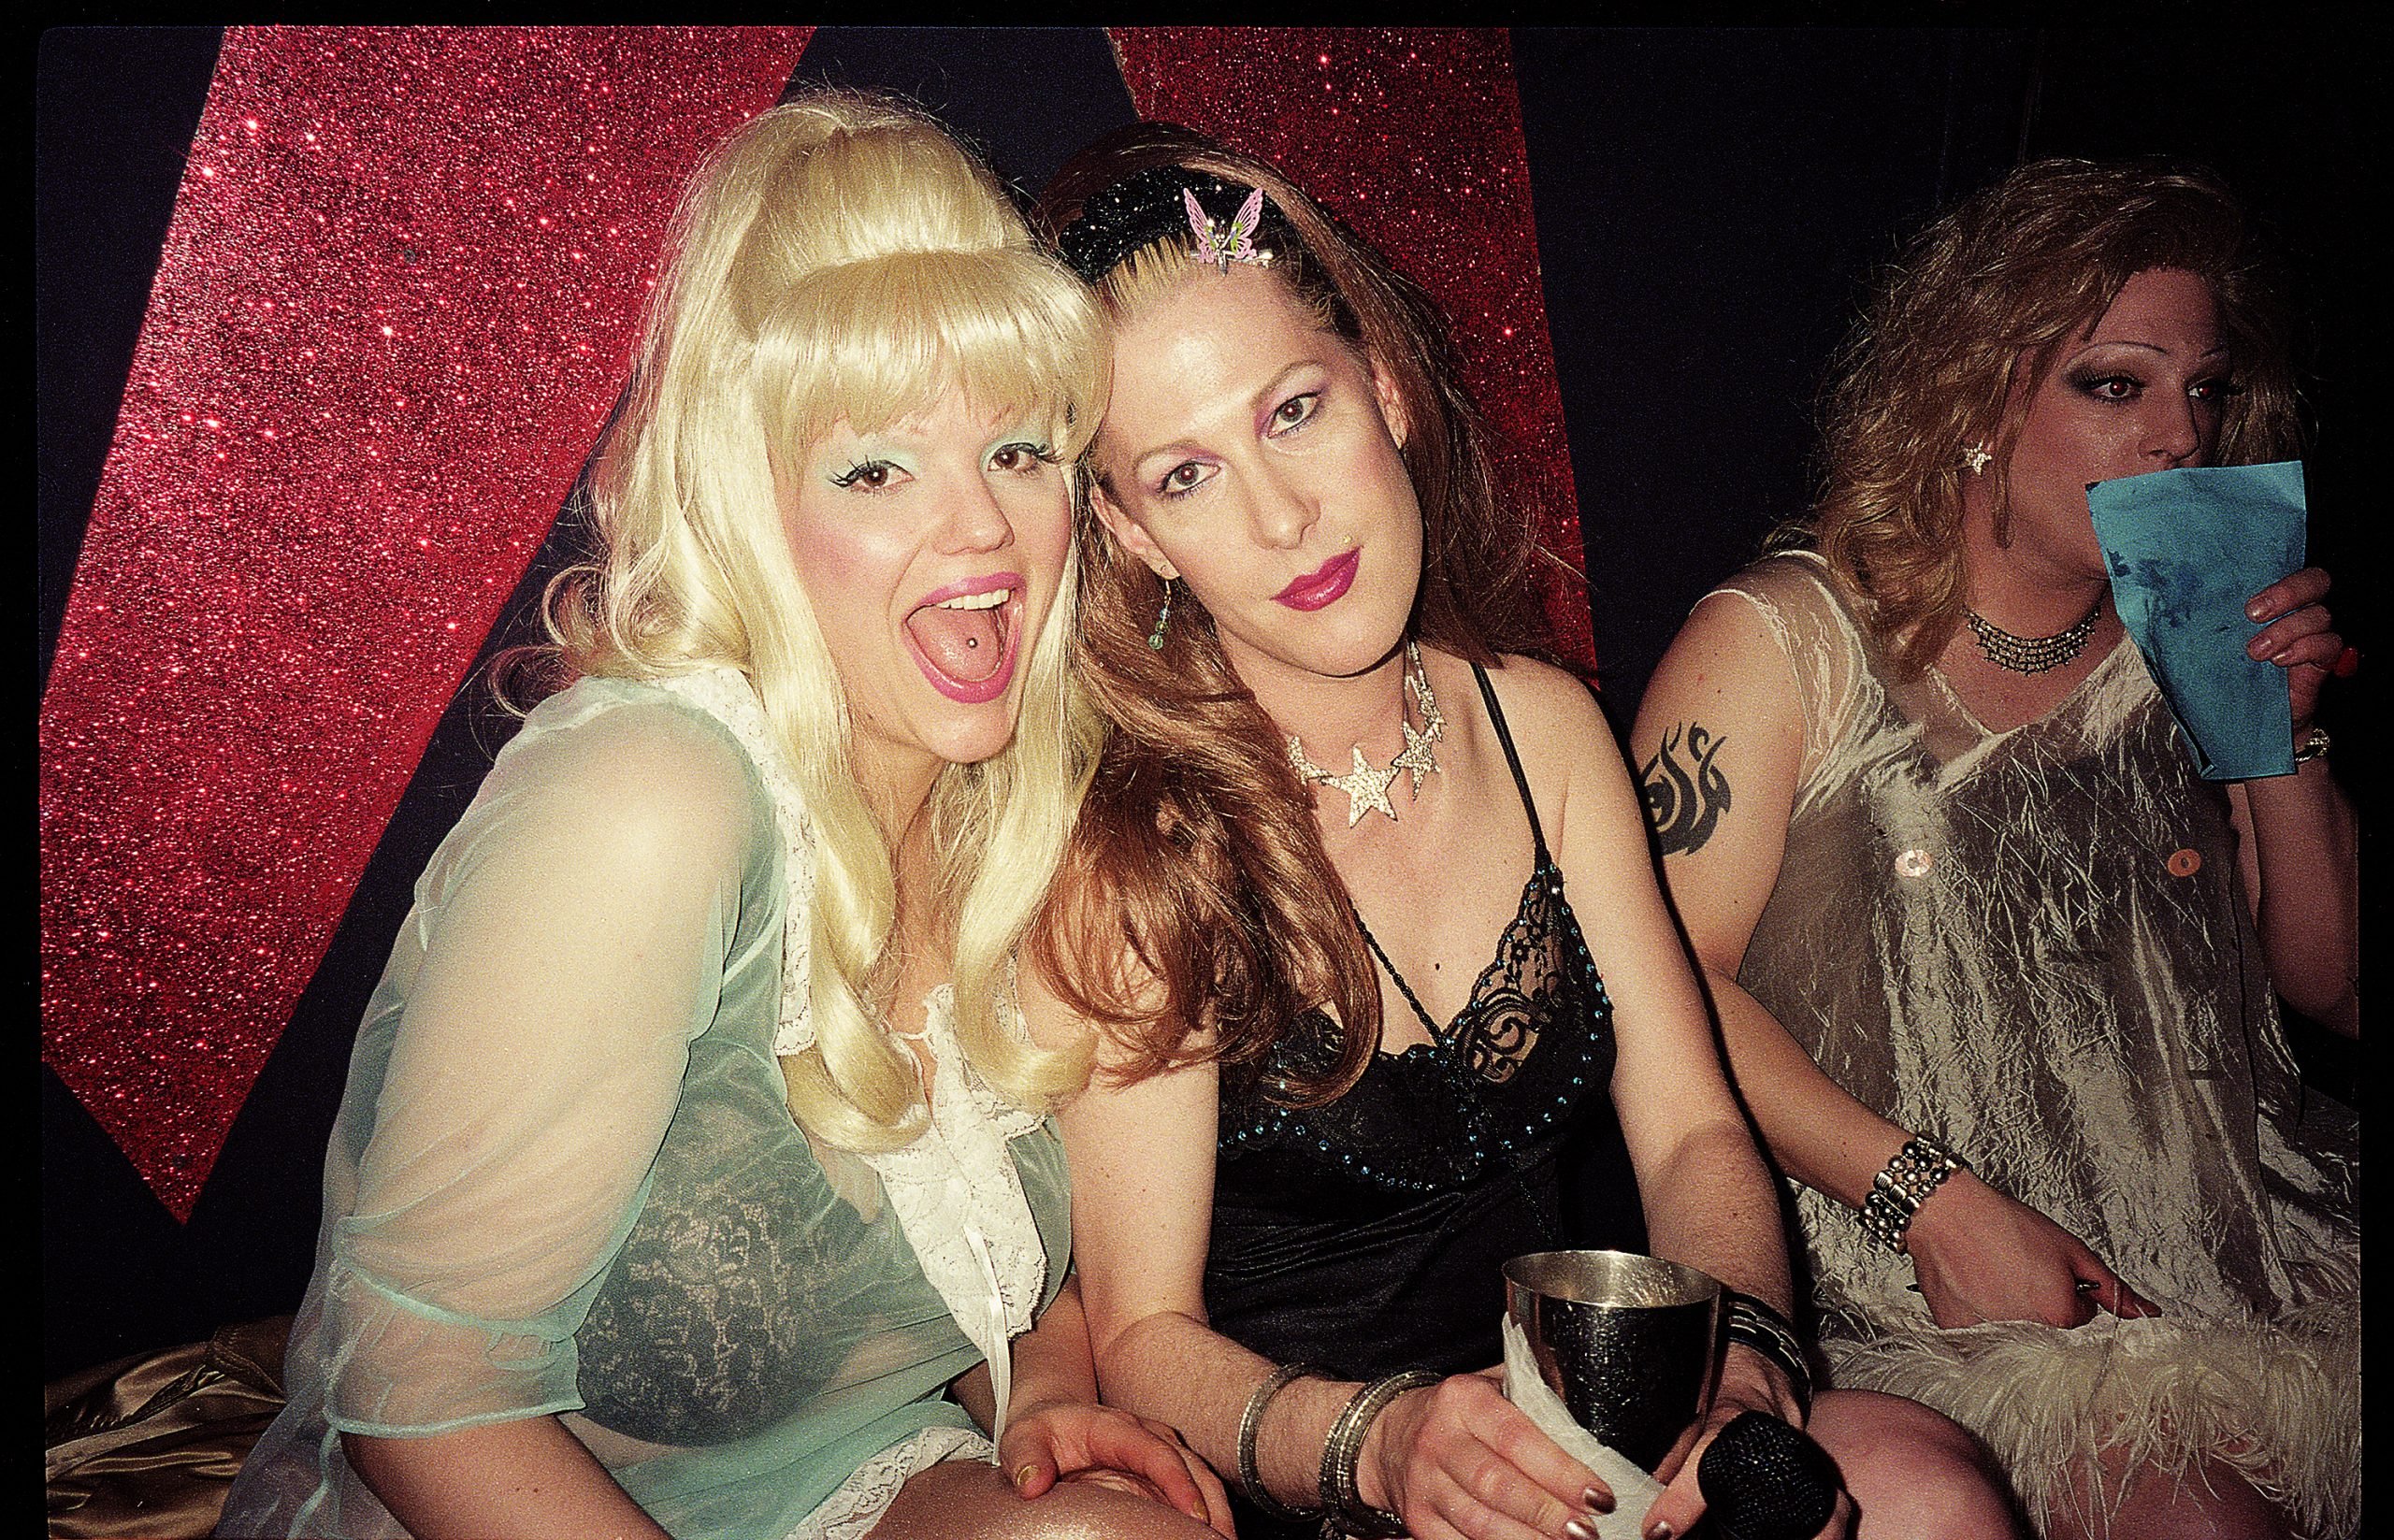 Relive Foxy, the Legendary Late-1990s New York Queer Party, Through These Never-Before-Published Photographs pic